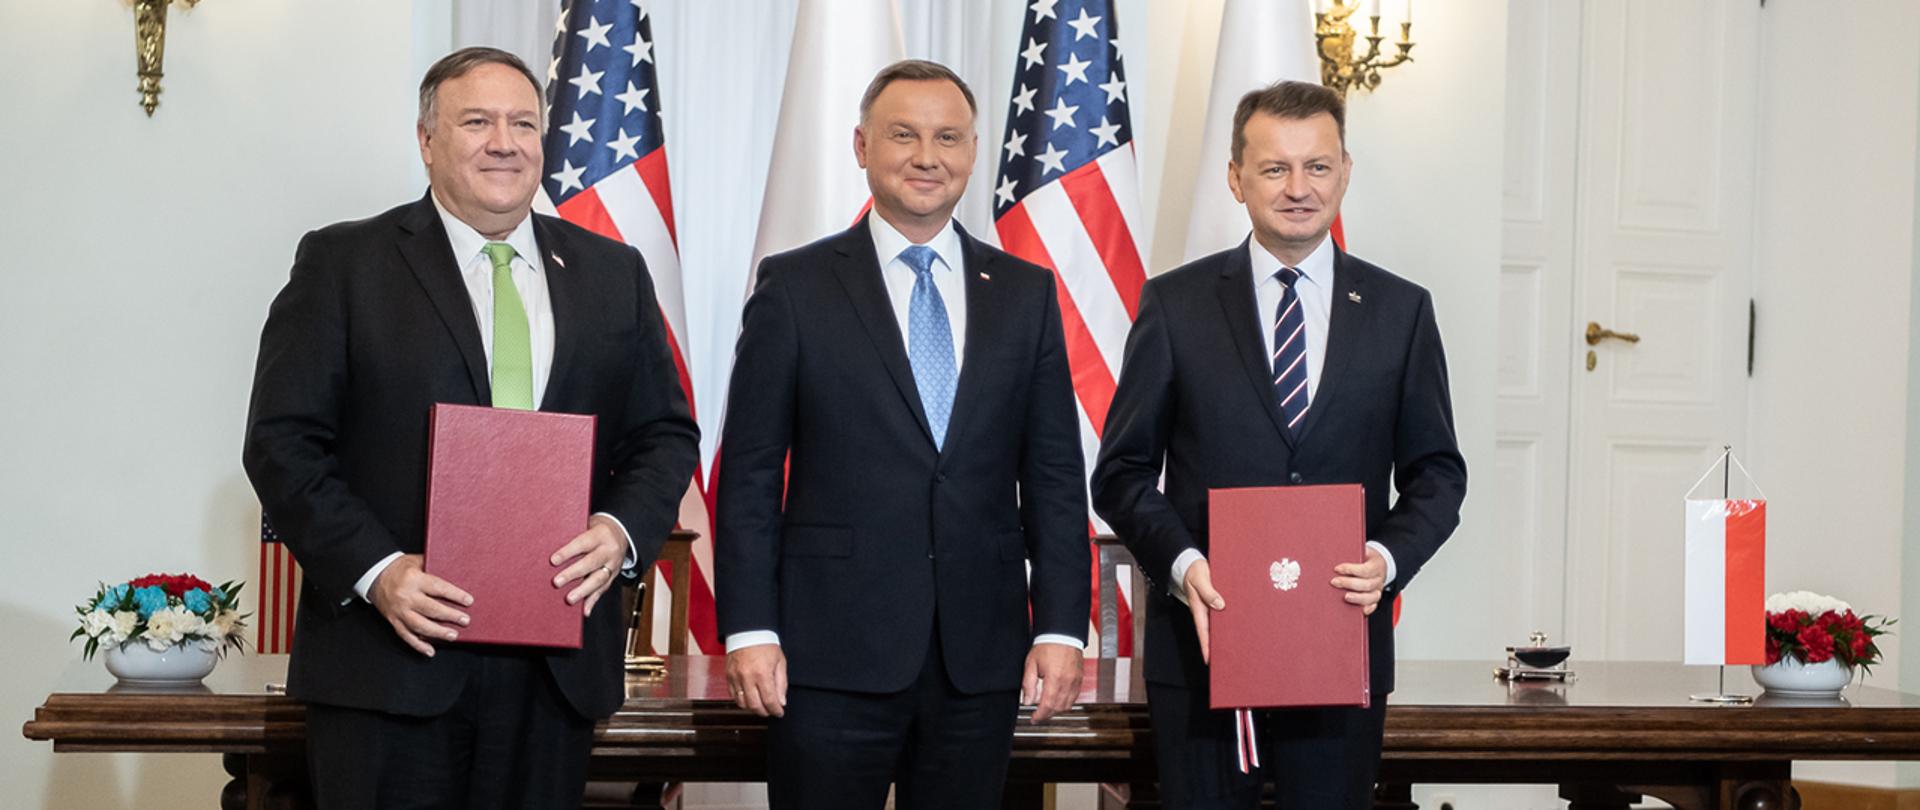 The US Secretary of State, Mike Pompeo and the Minister of National Defence, Mariusz Błaszczak signed an agreement on defense cooperation, on August 15th . The signing ceremony took place in Warsaw in the Presidential Palace in the presence of the President of the Republic of Poland, Andrzej Duda.